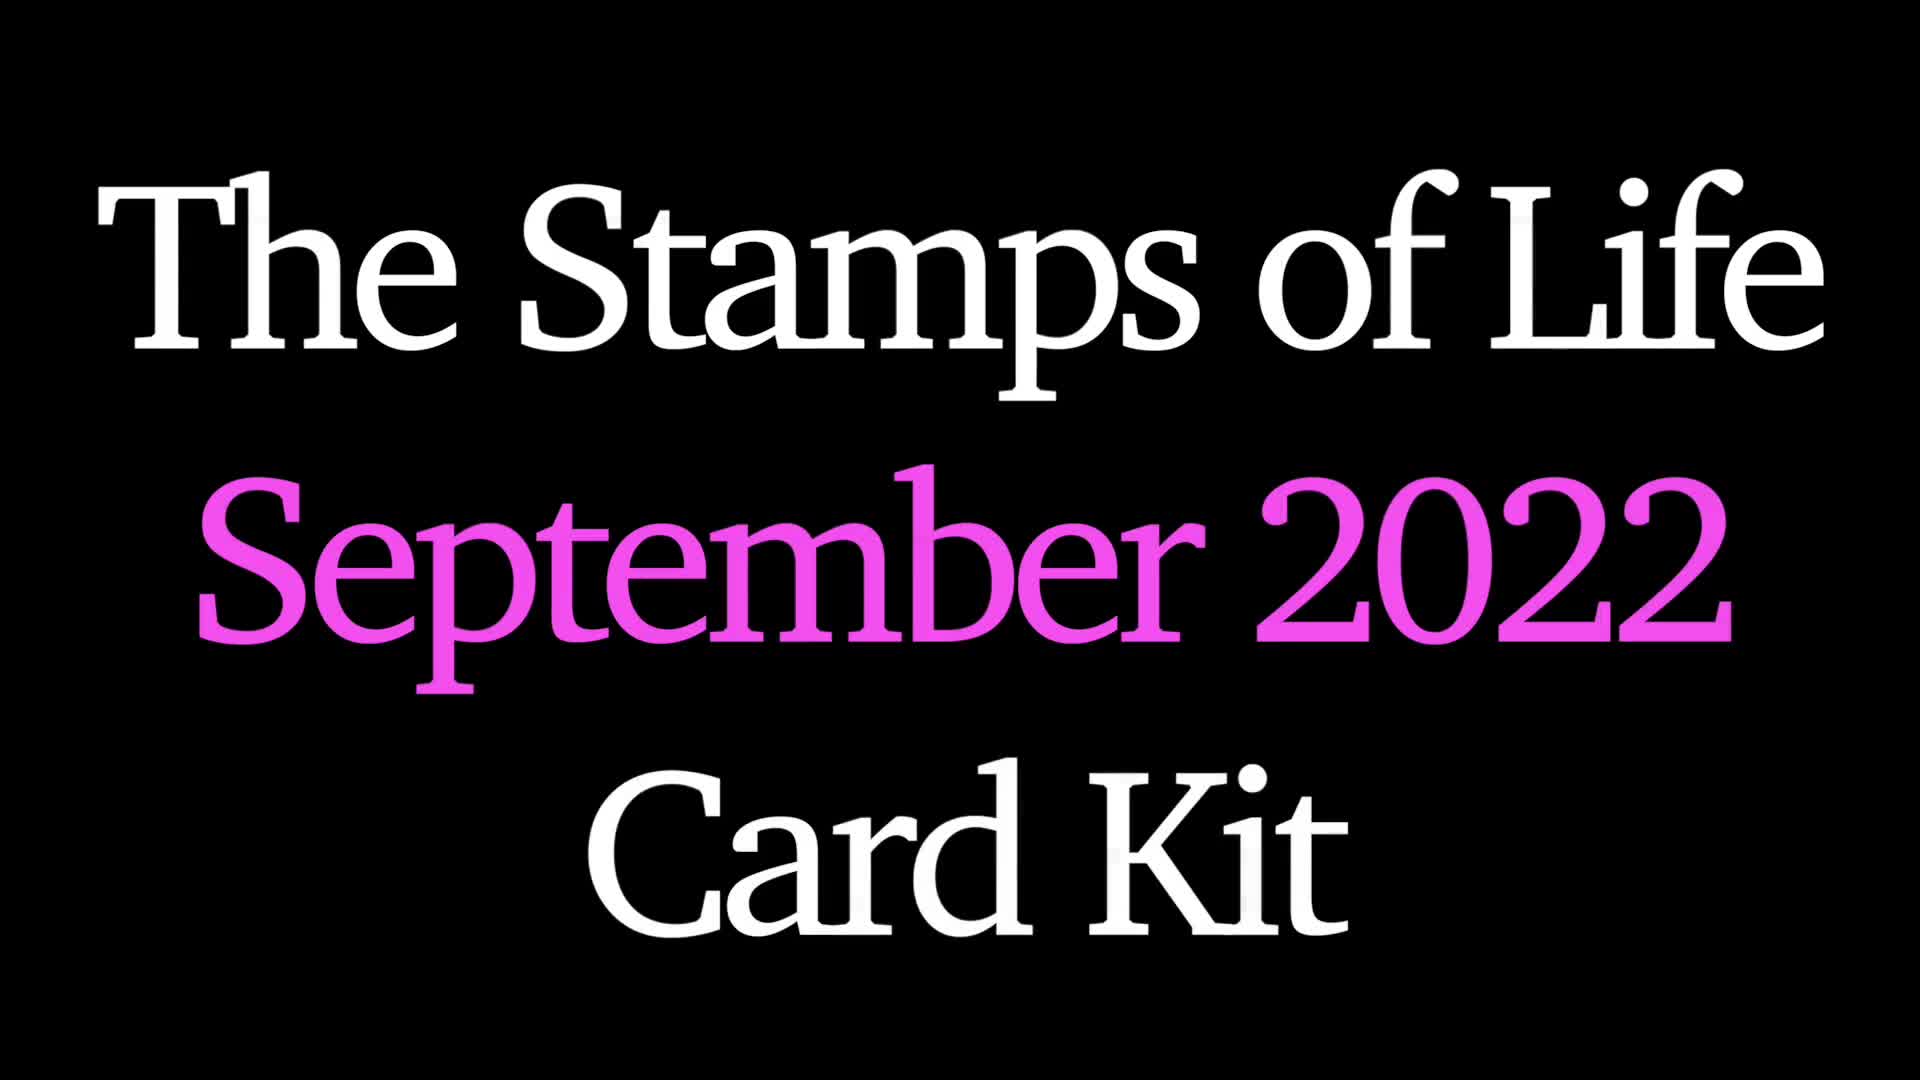 The Stamps of Life September 2022 Card Kit